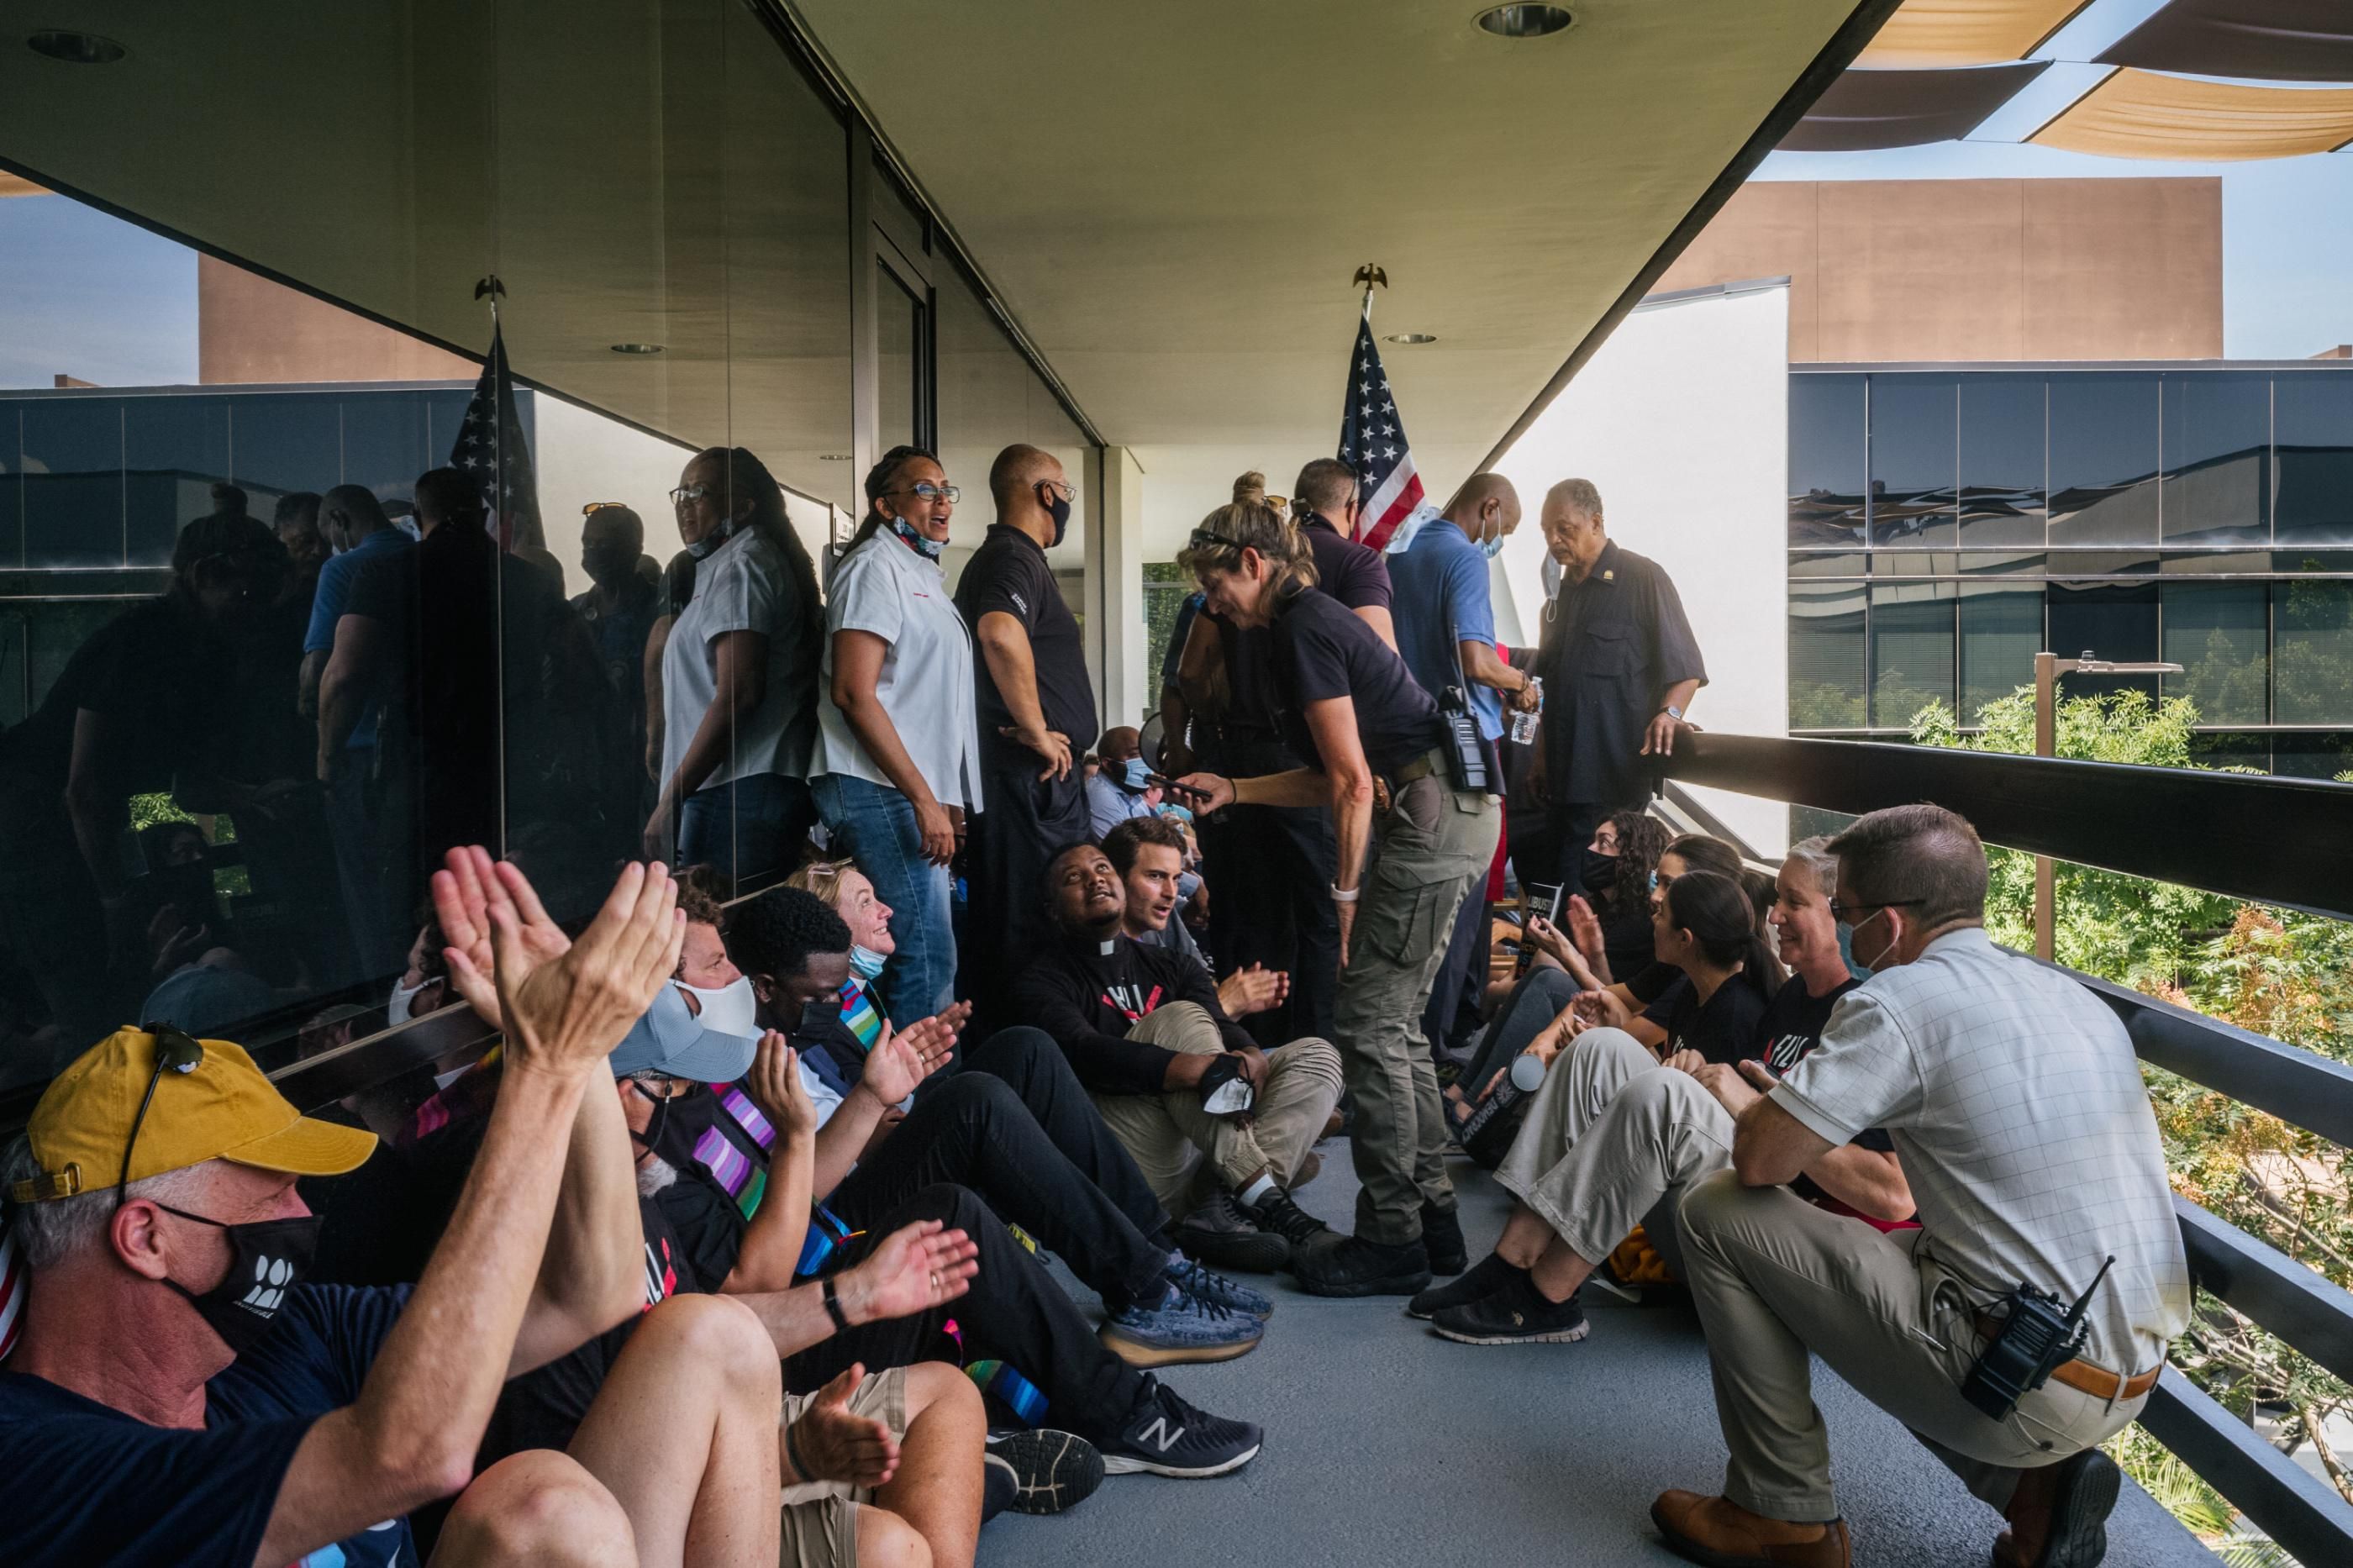 Protesters are processed by law enforcement during a sit-in demonstration outside the office of Sen. Kyrsten Sinema (D-Ariz.) on July 26, 2021 in Phoenix. (Photo: Brandon Bell via Getty Images)